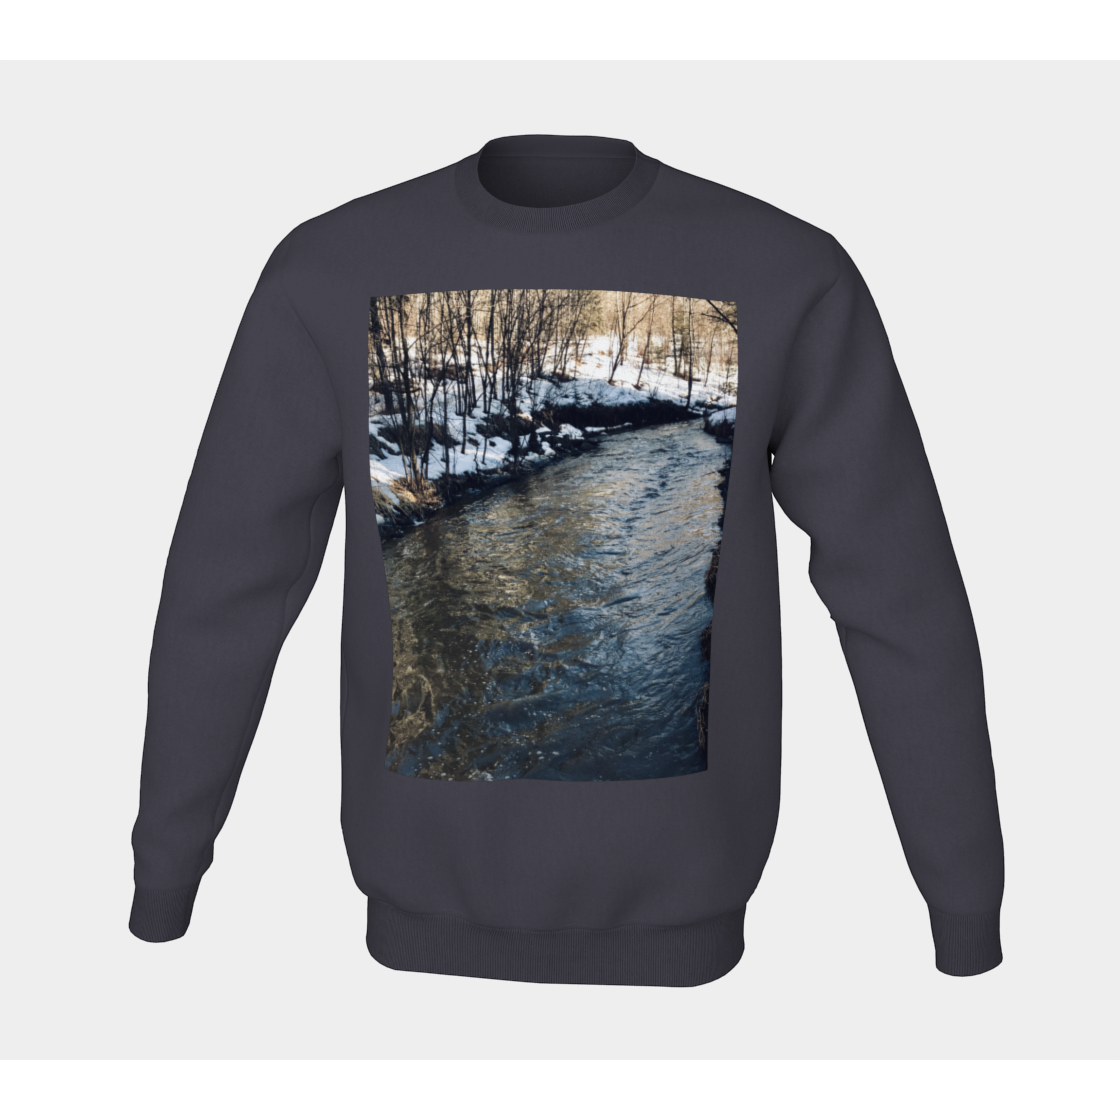 Sweatshirt for Women and Men with River Running Picture, Front